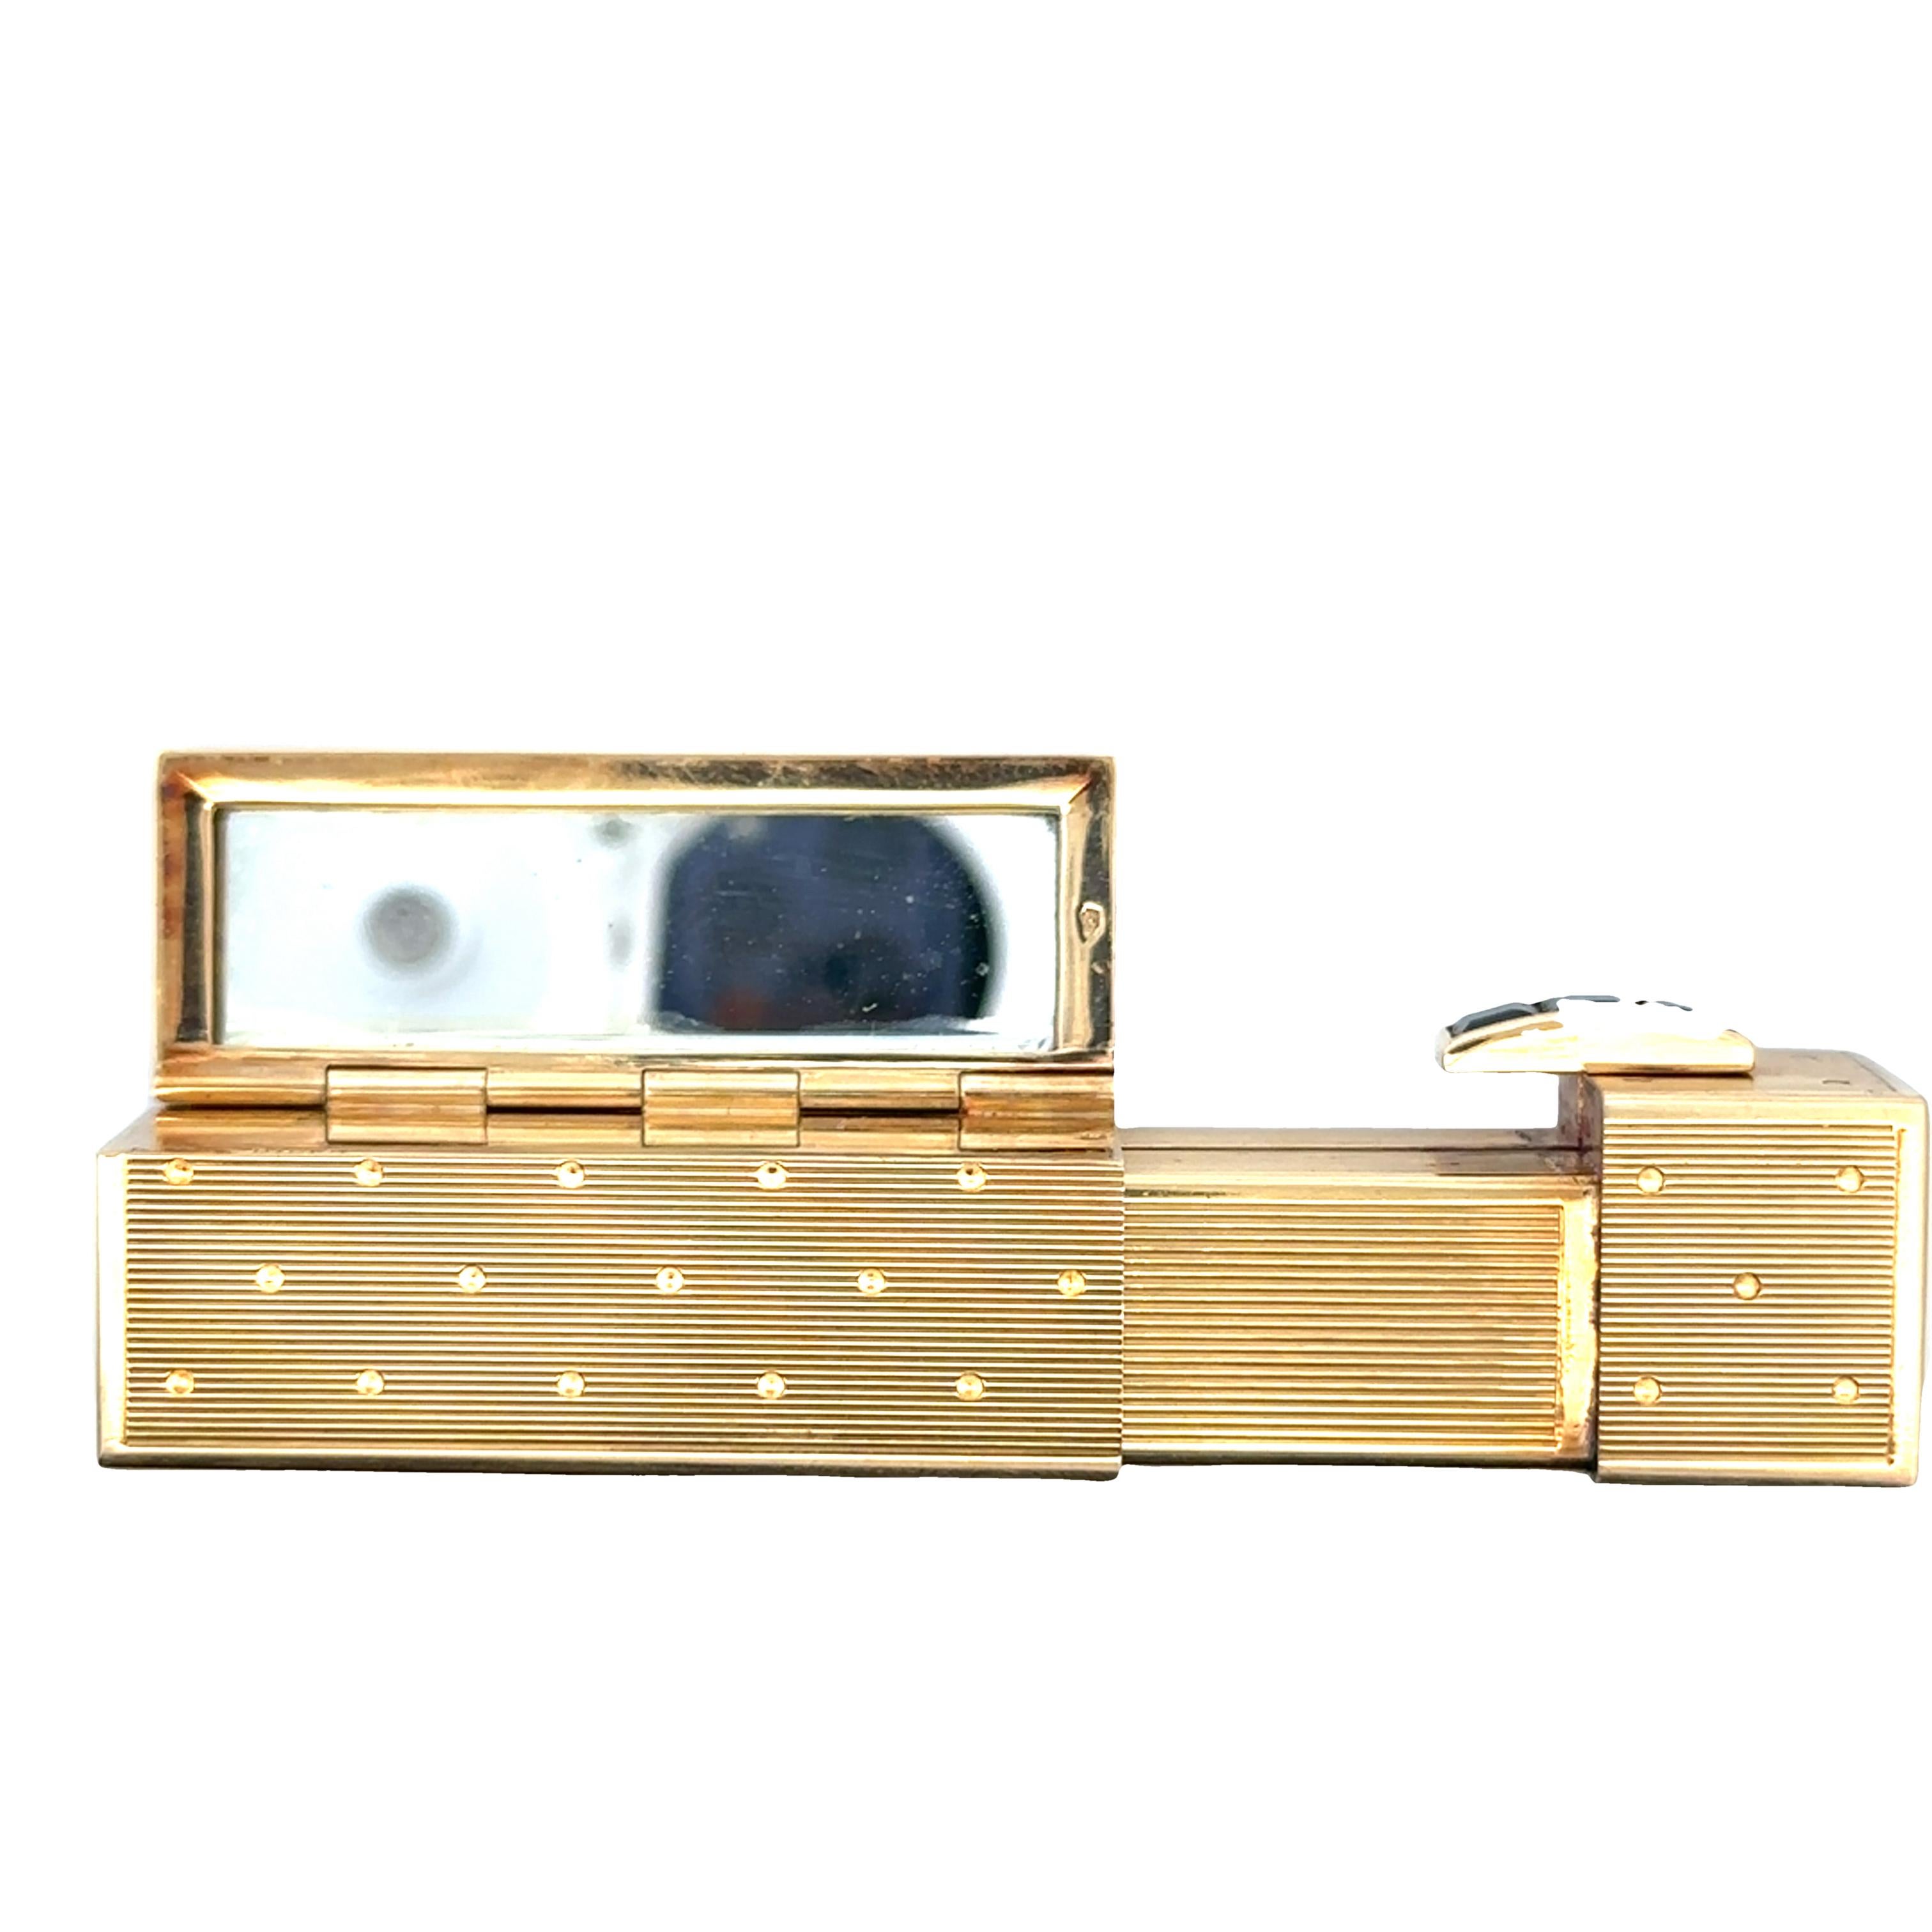 A unique and charming Retro sapphire and gold lipstick holder created by Keltz Bloch. This vintage piece of jewelry is not only a functional accessory but also a testament to the style and craftsmanship of its time.

Keltz Bloch was a renowned